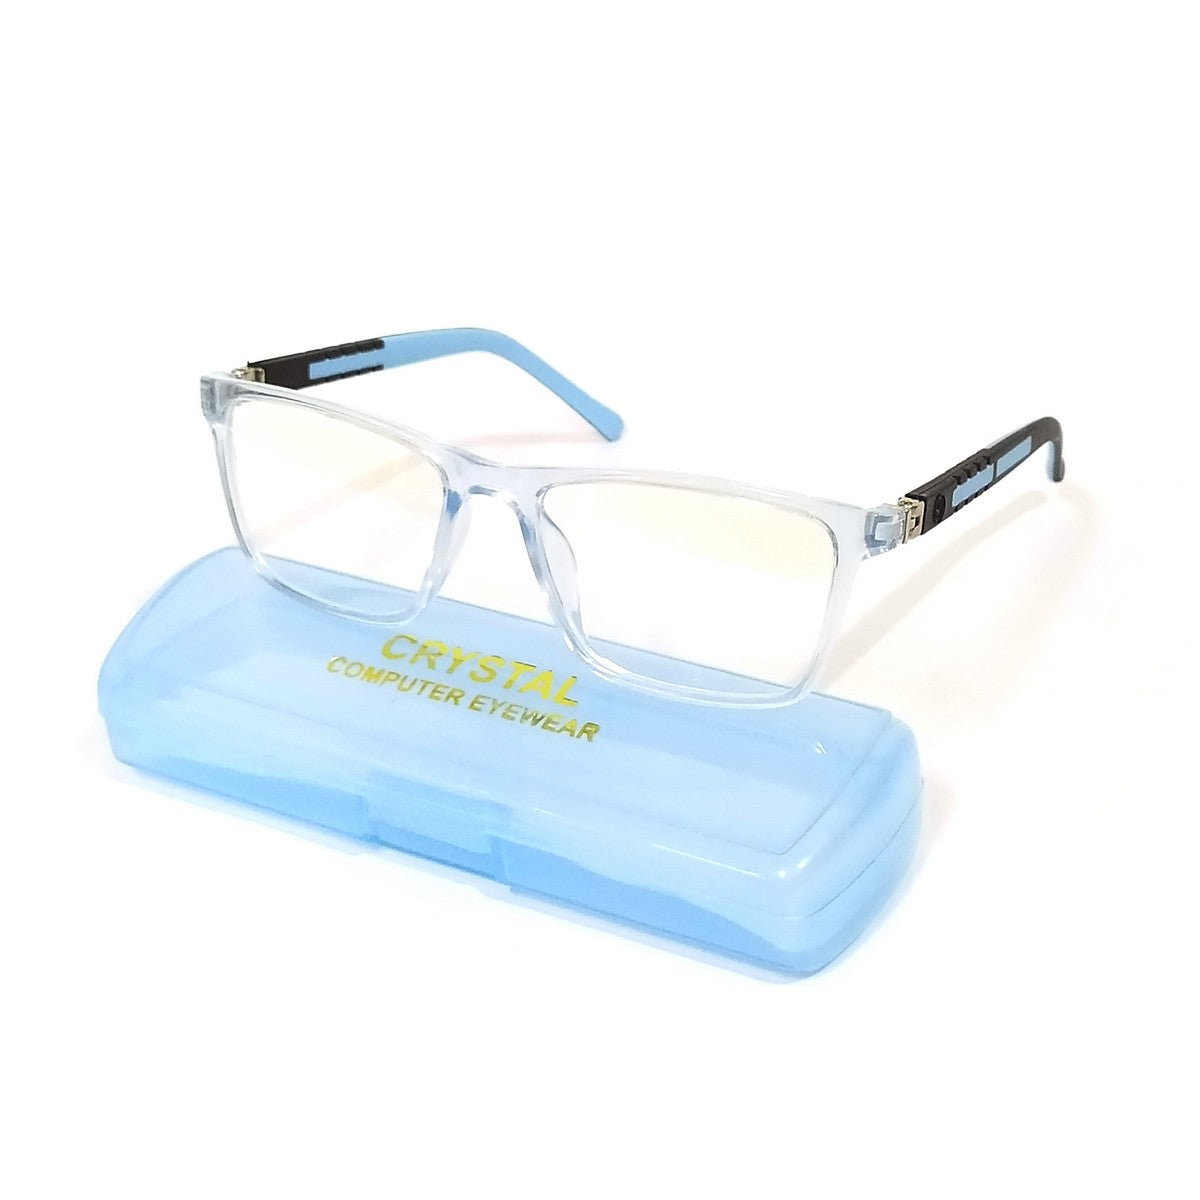 Blue and Bold: TR68 Transparent Blue Glasses - Safe Blue Light Glasses for 6-12-Year-Old Boys and Girls